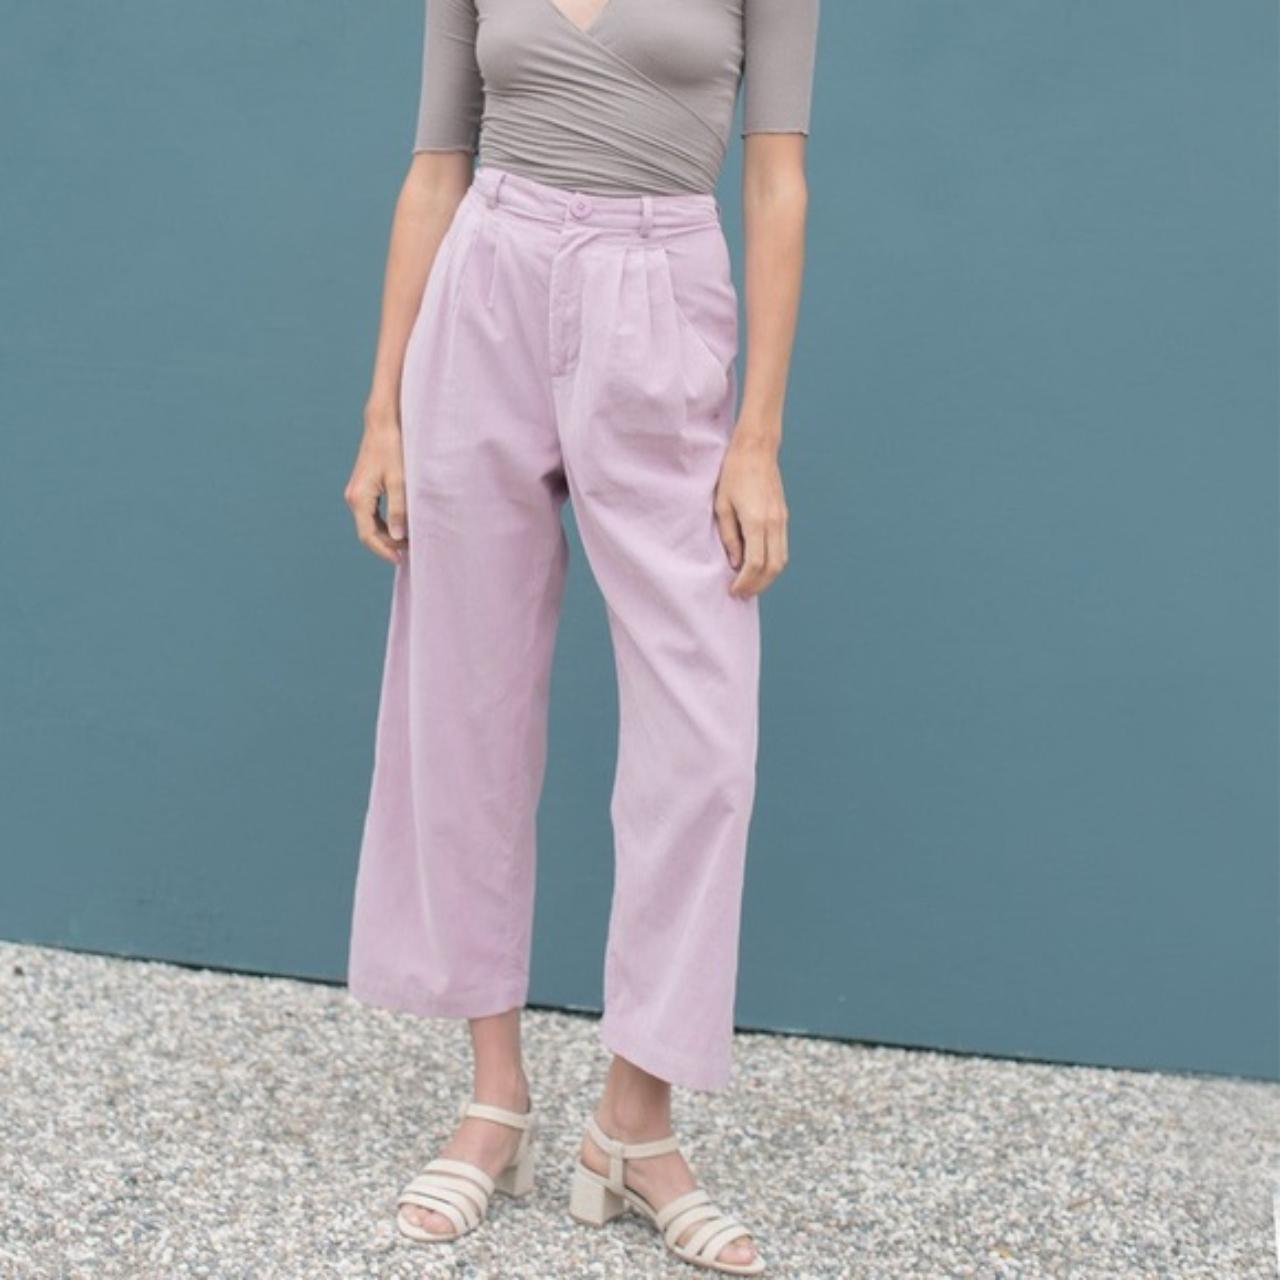 DKNY Slim Fit Dusty Pink Trousers | Buy Online at Moss